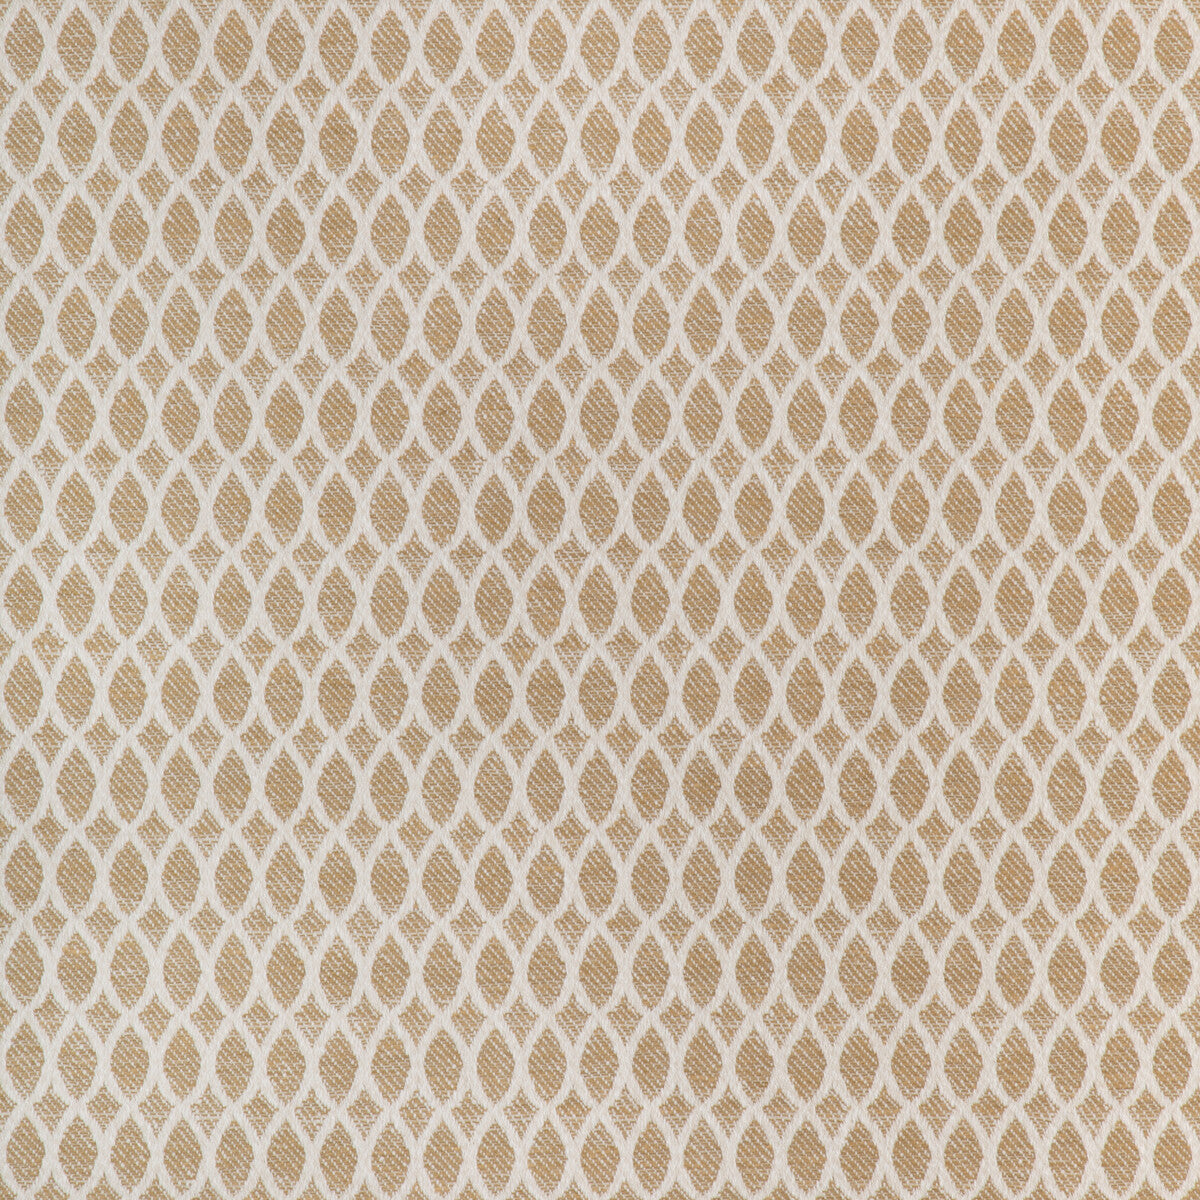 Kravet Design fabric in 37114-414 color - pattern 37114.414.0 - by Kravet Design in the Woven Colors collection